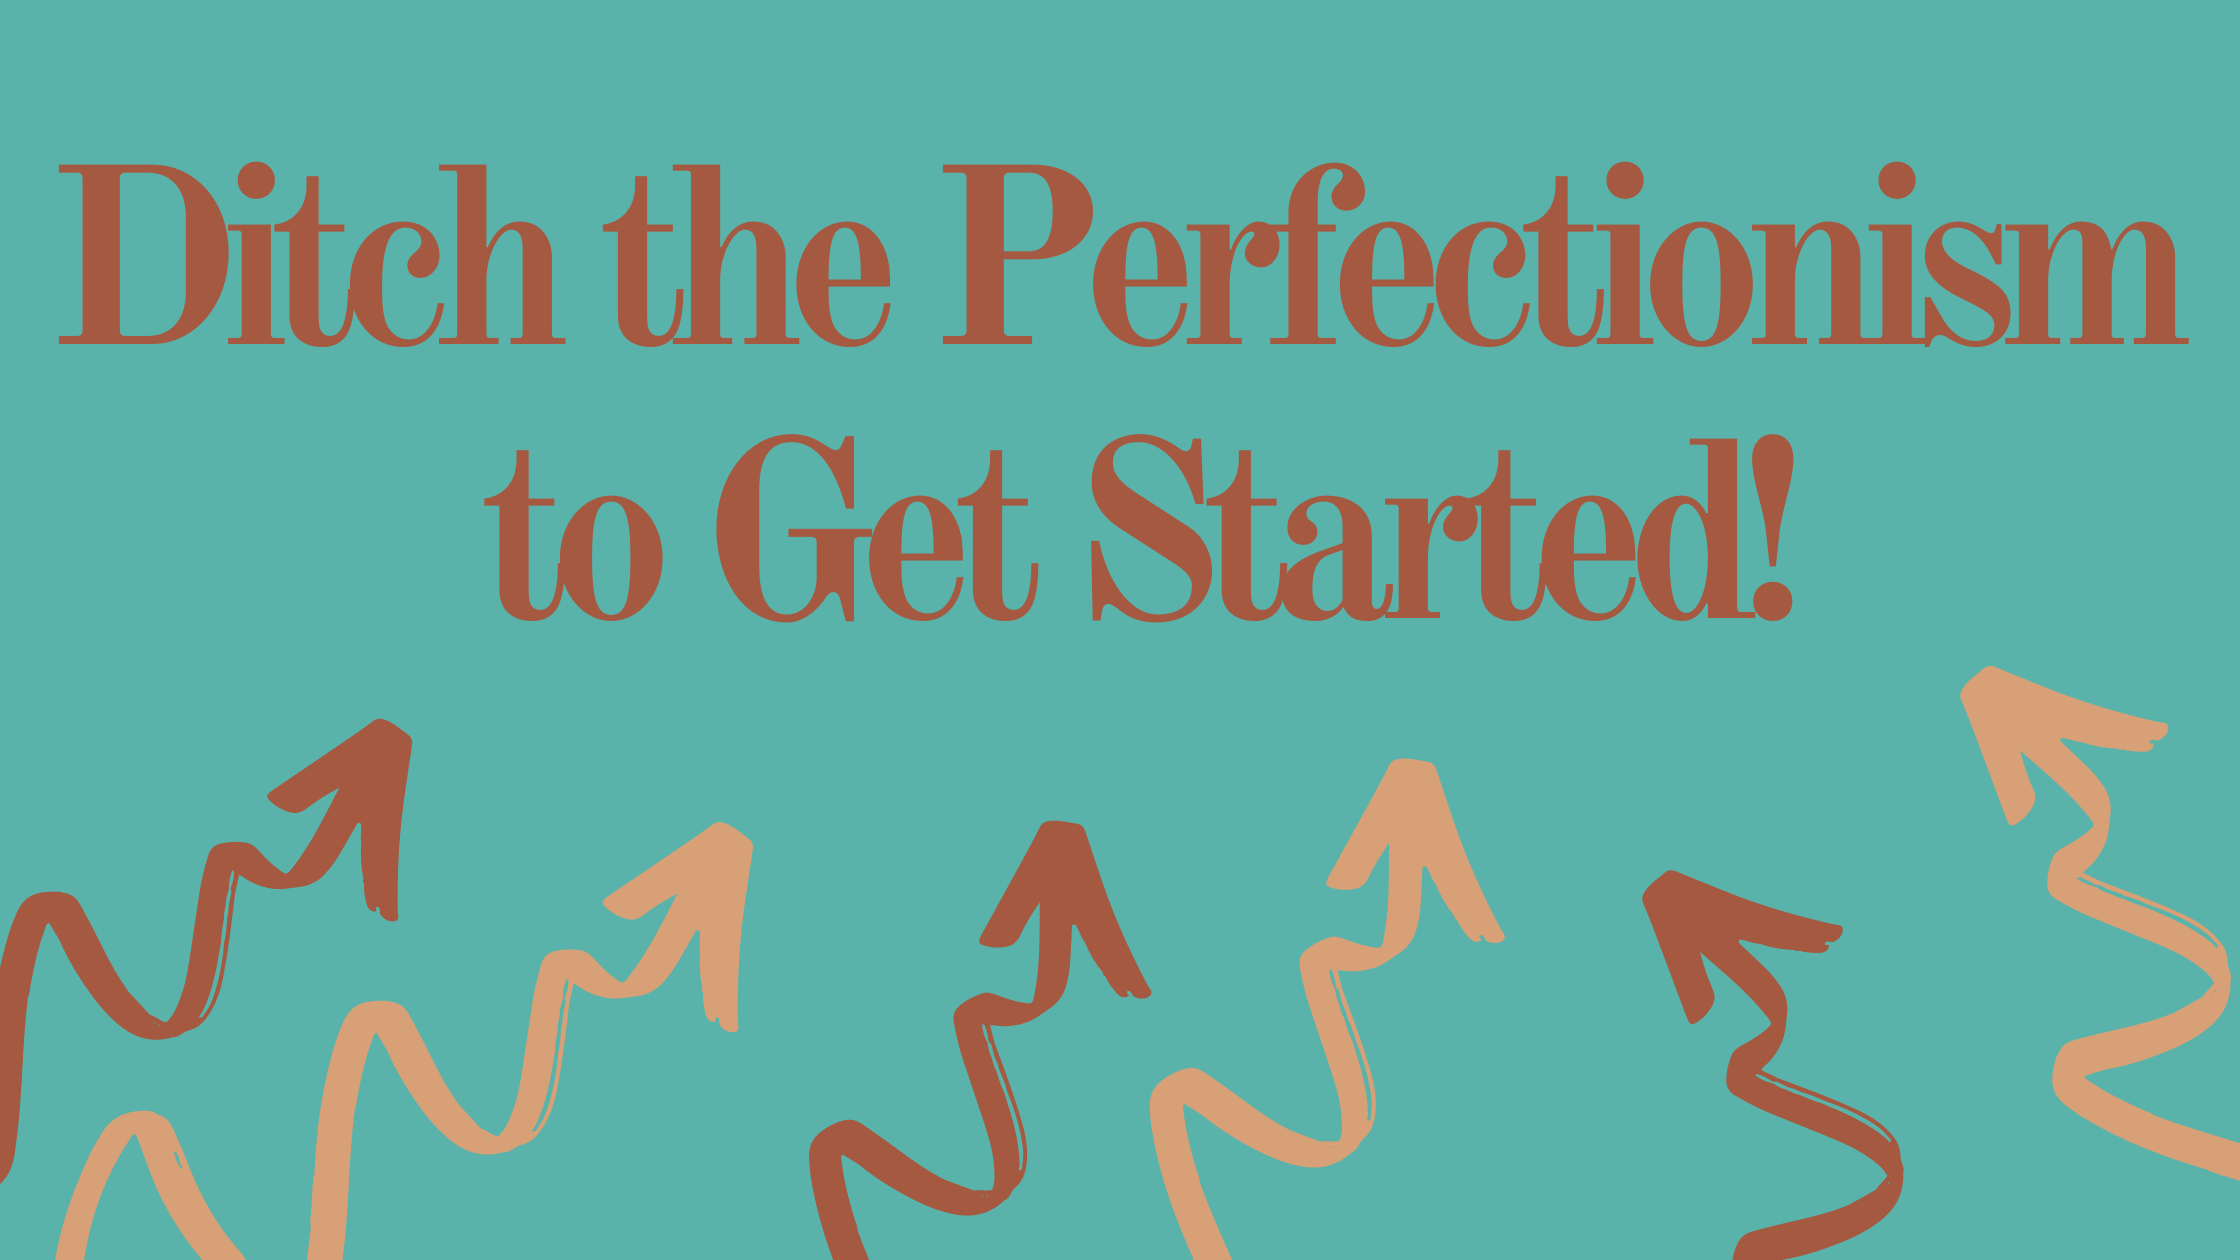 Ditch the Perfectionism